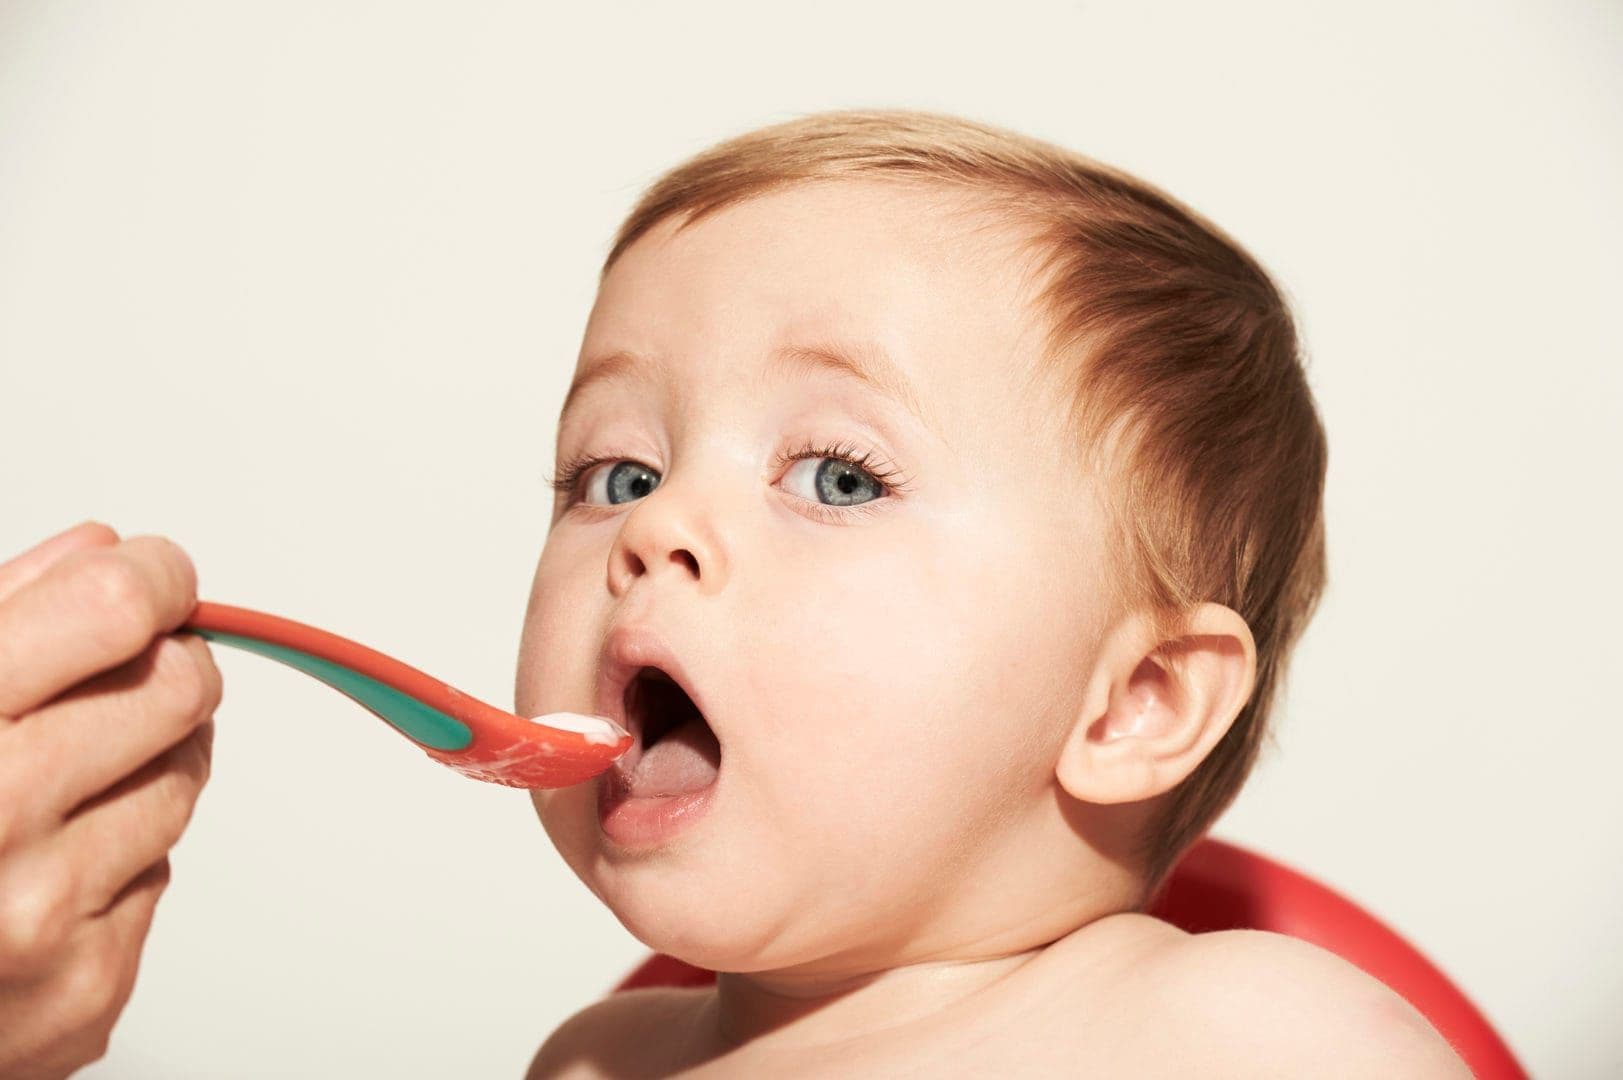 The Best Baby Feeding Supplies for Starting Solid Foods - Kids Eat